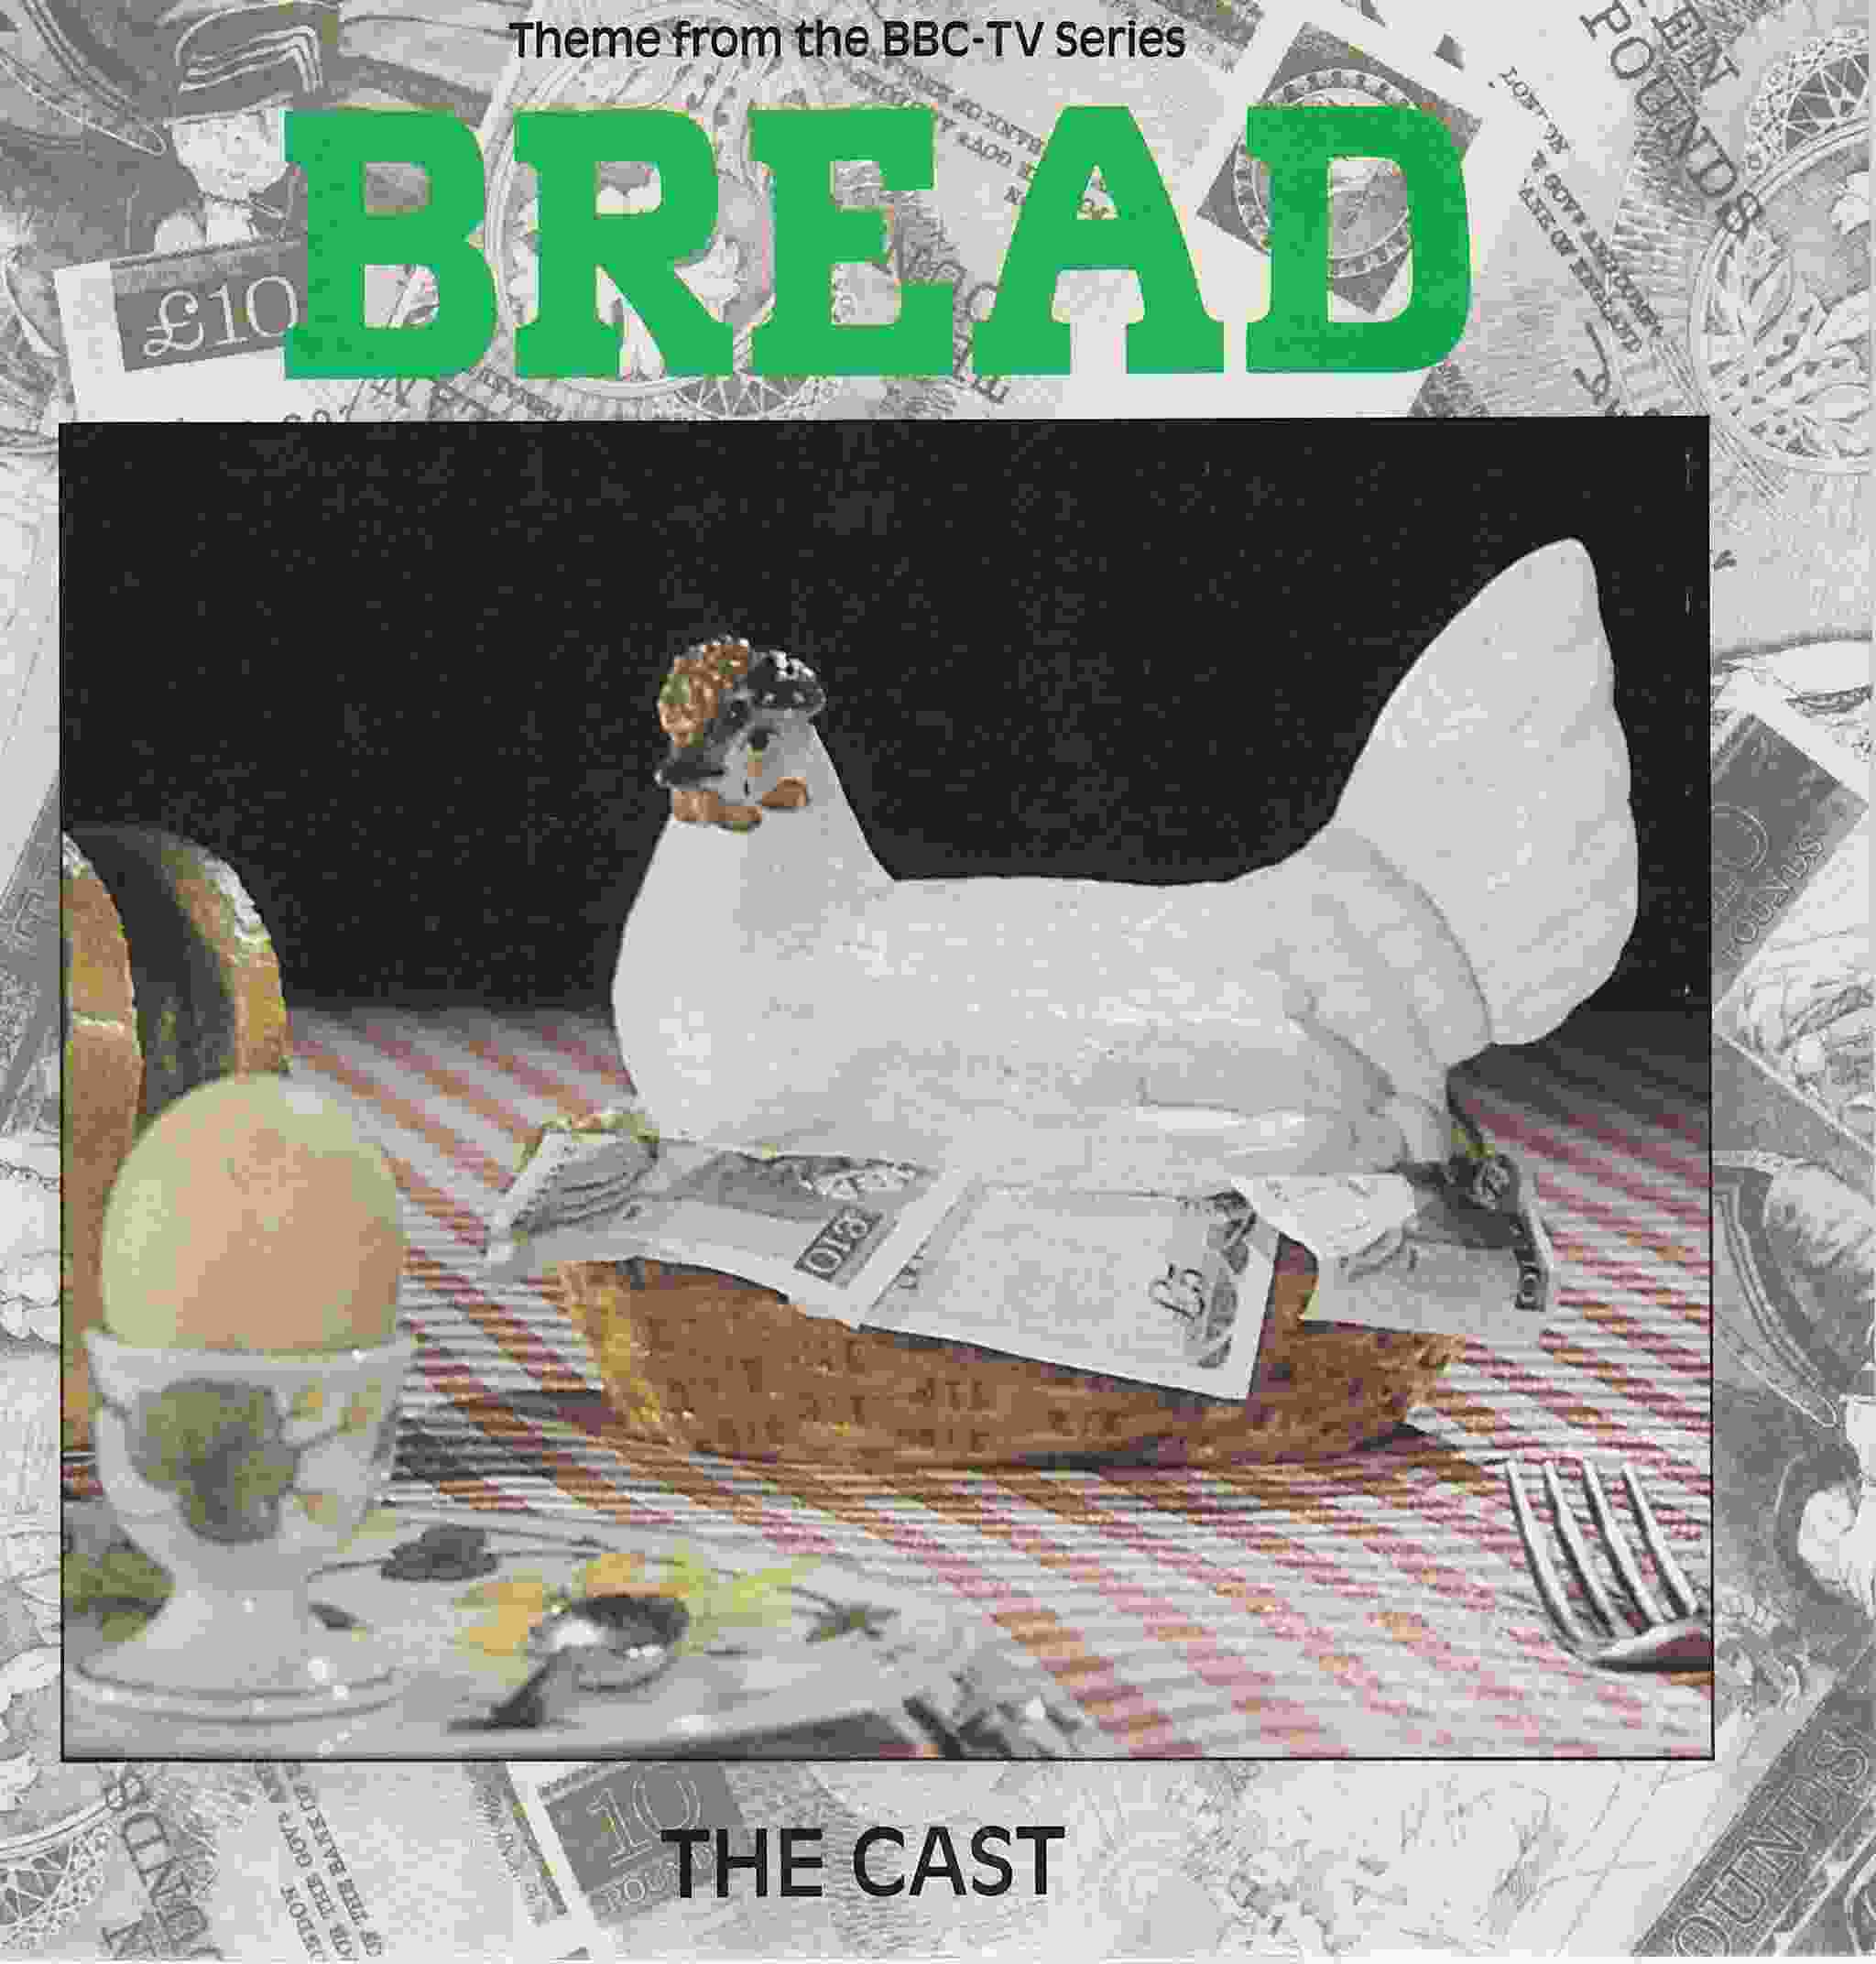 Picture of Home (Bread) by artist Carla Lane / David Mackay / The Cast / Nick Conway from the BBC singles - Records and Tapes library